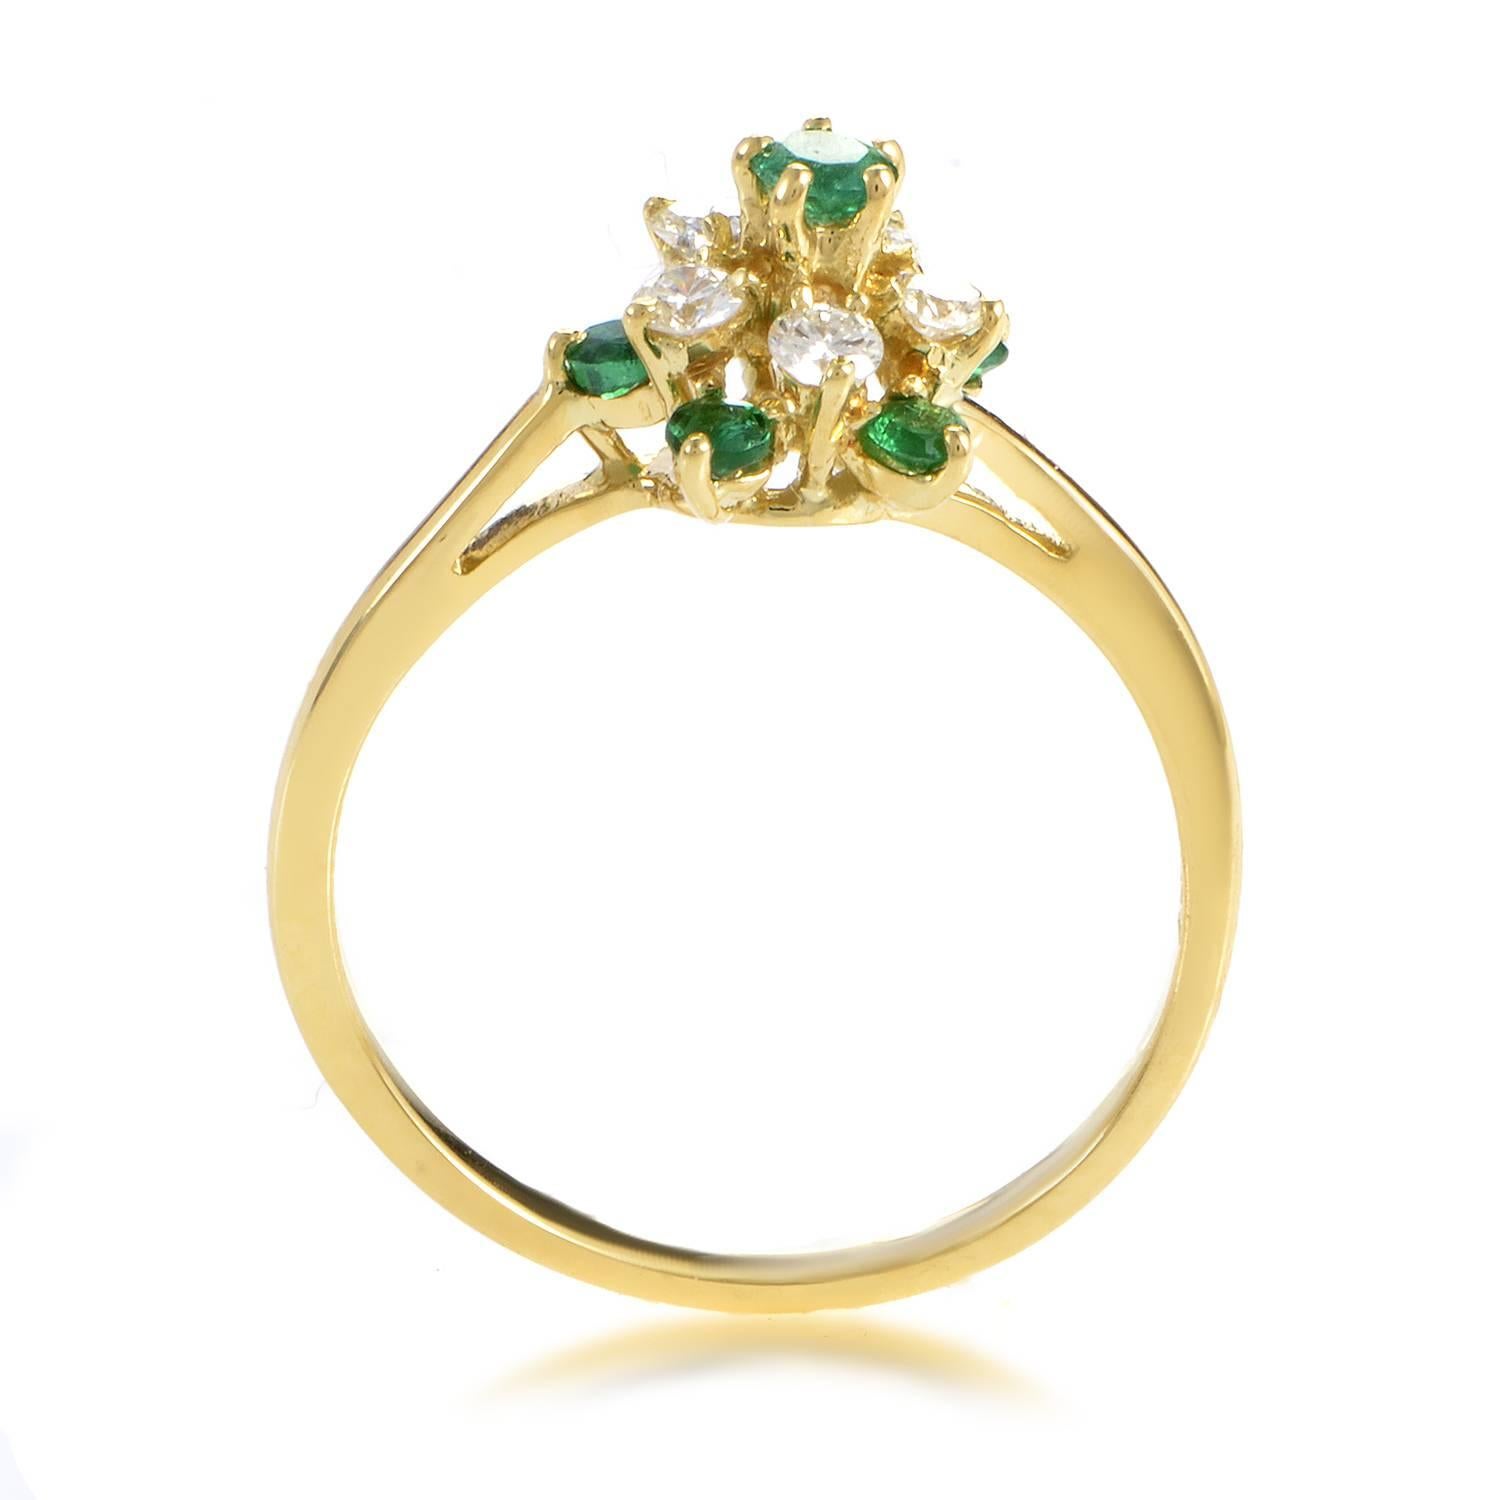 A fascinating blend of elegant emeralds totaling 0.40ct and scintillating diamonds weighing in total 0.25ct is arranged marvelously on top of a slim body made of precious 18K yellow gold in this fantastic ring from Kutchinsky.
Ring Size: 8.0 (56